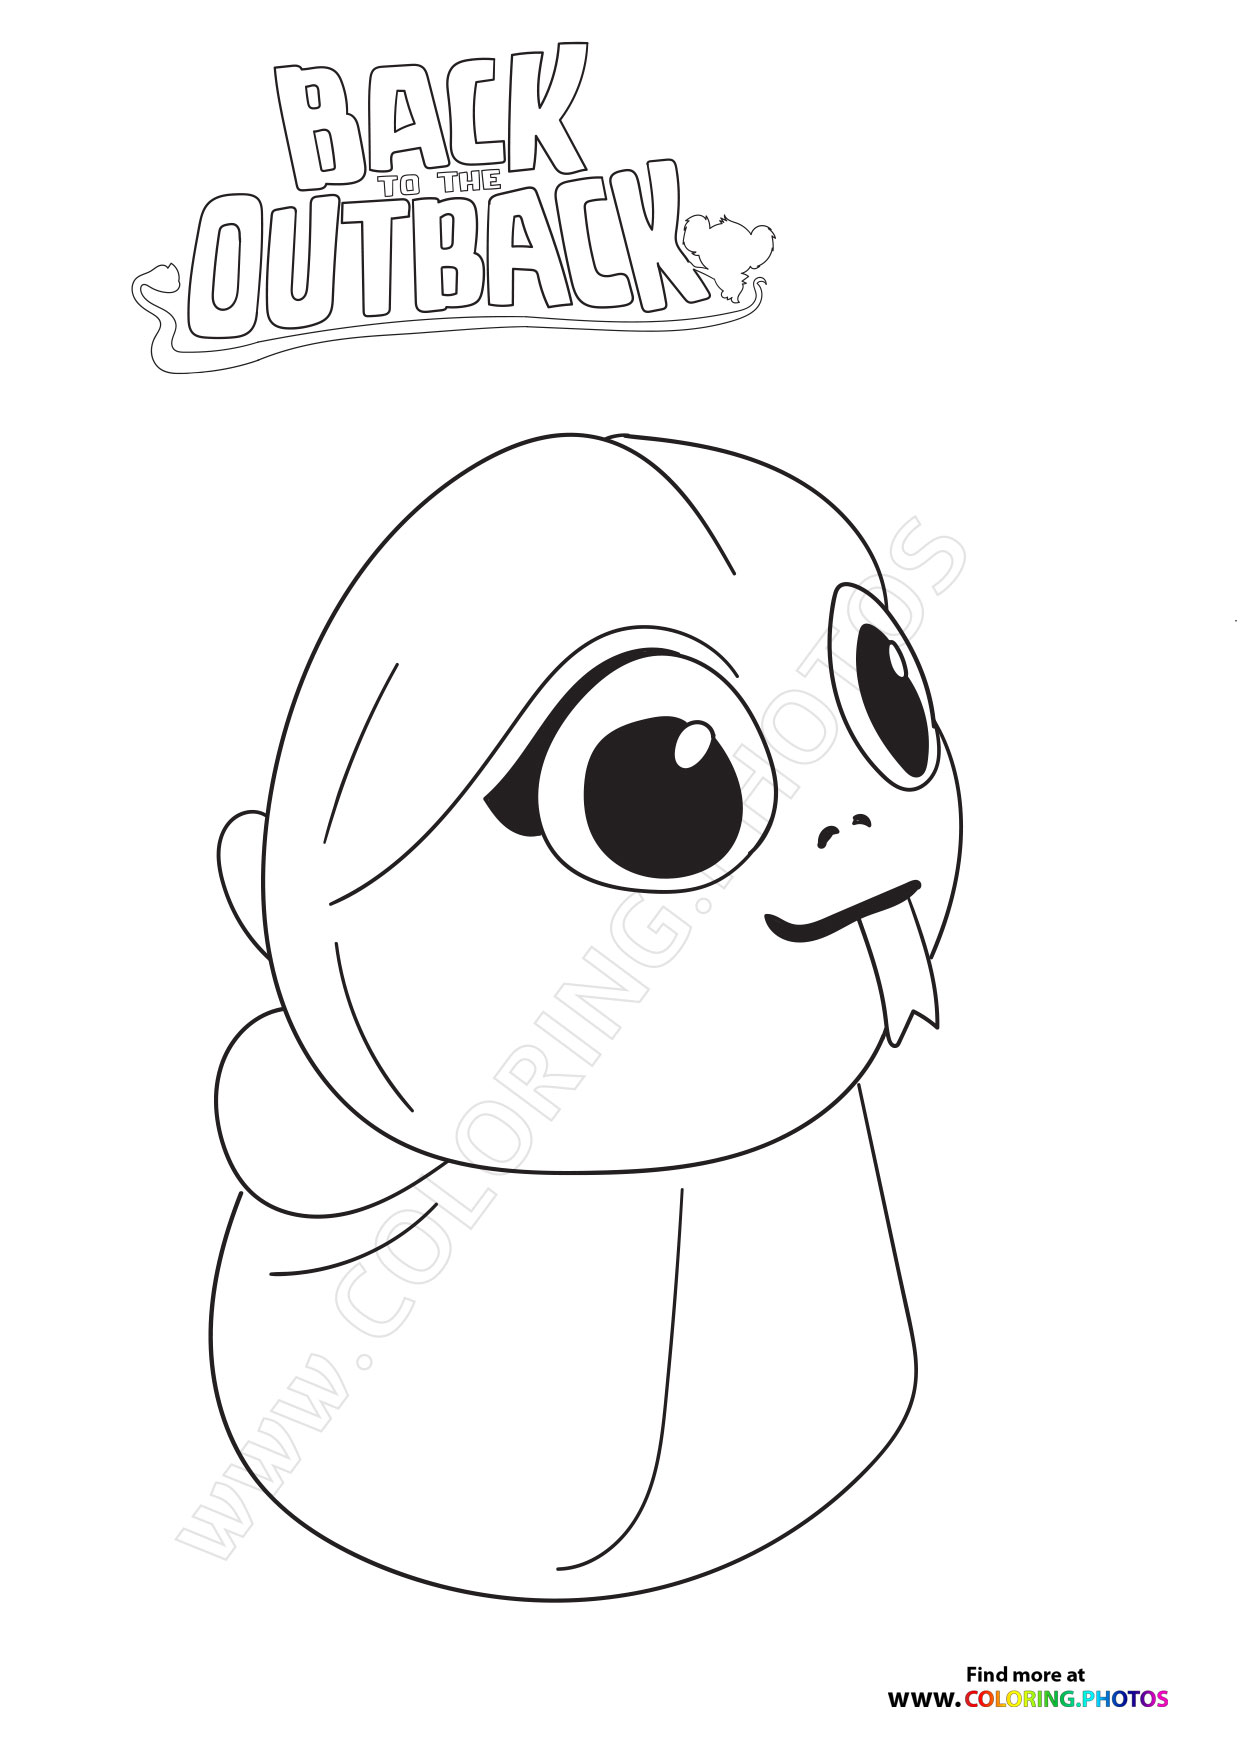 Maddie from Back to the Outback - Coloring Pages for kids